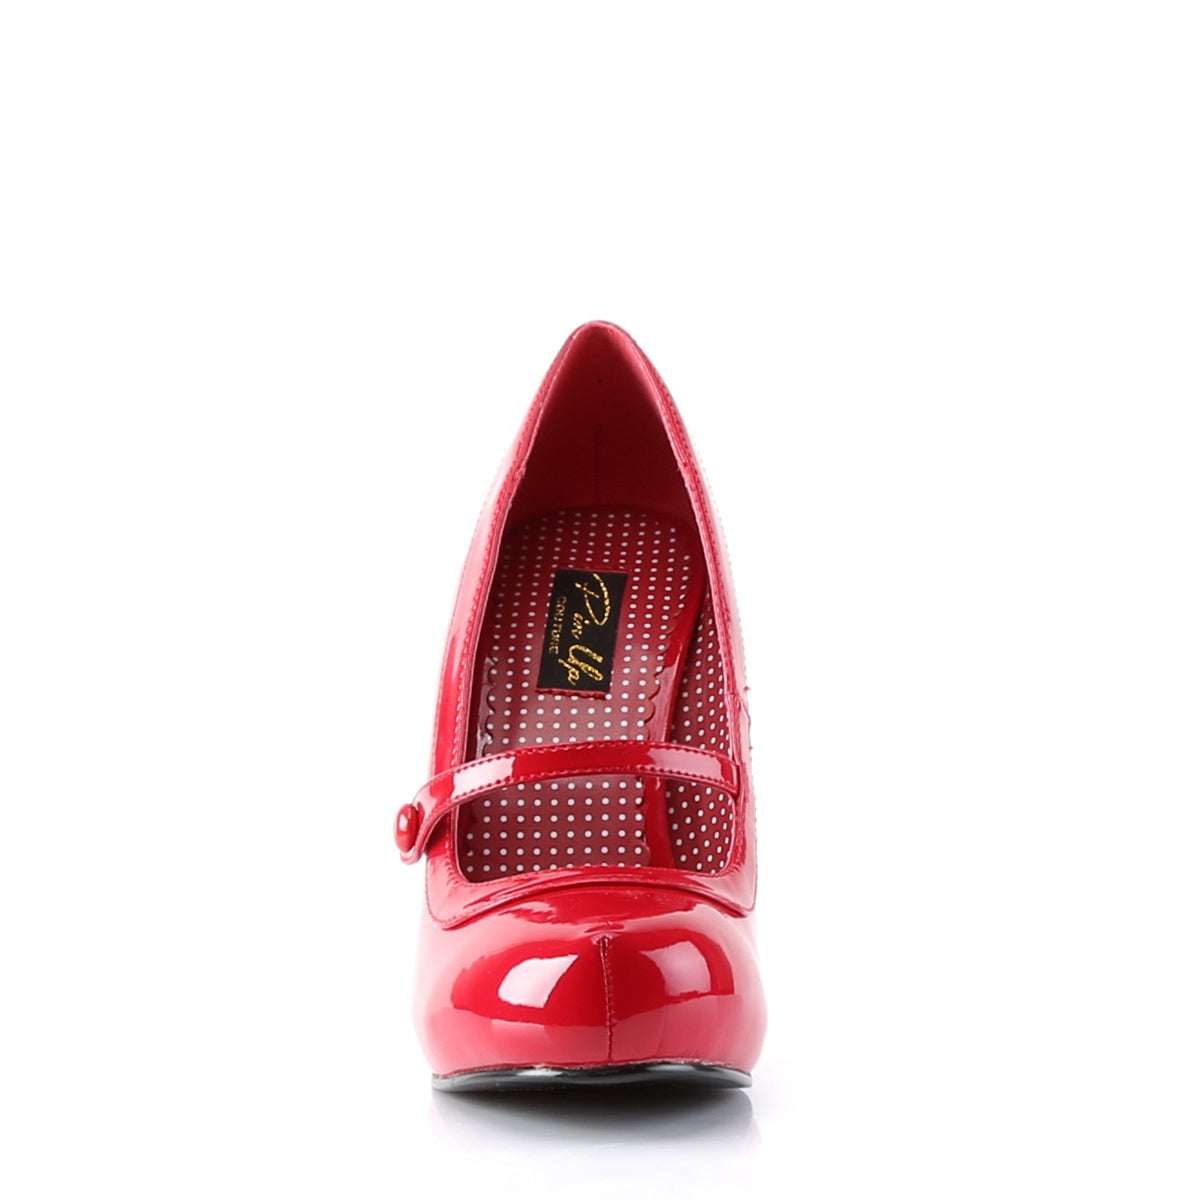 CUTIEPIE-02 Pin Up 4.5 Inch Heel Red Retro Glamour Platforms-Pin Up Couture- Sexy Shoes Alternative Footwear